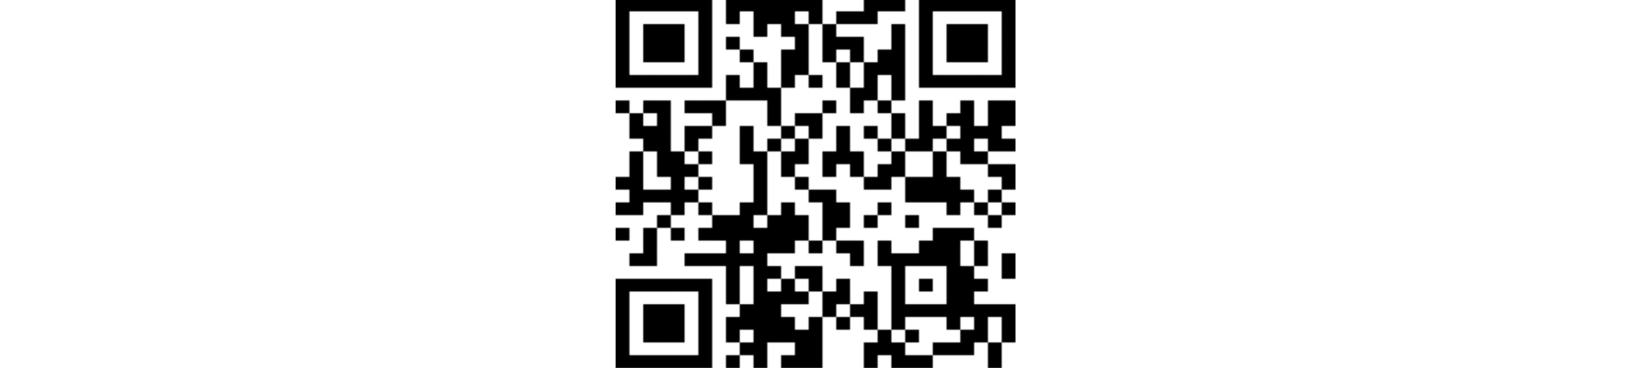 Scan to donate your Celo Assets